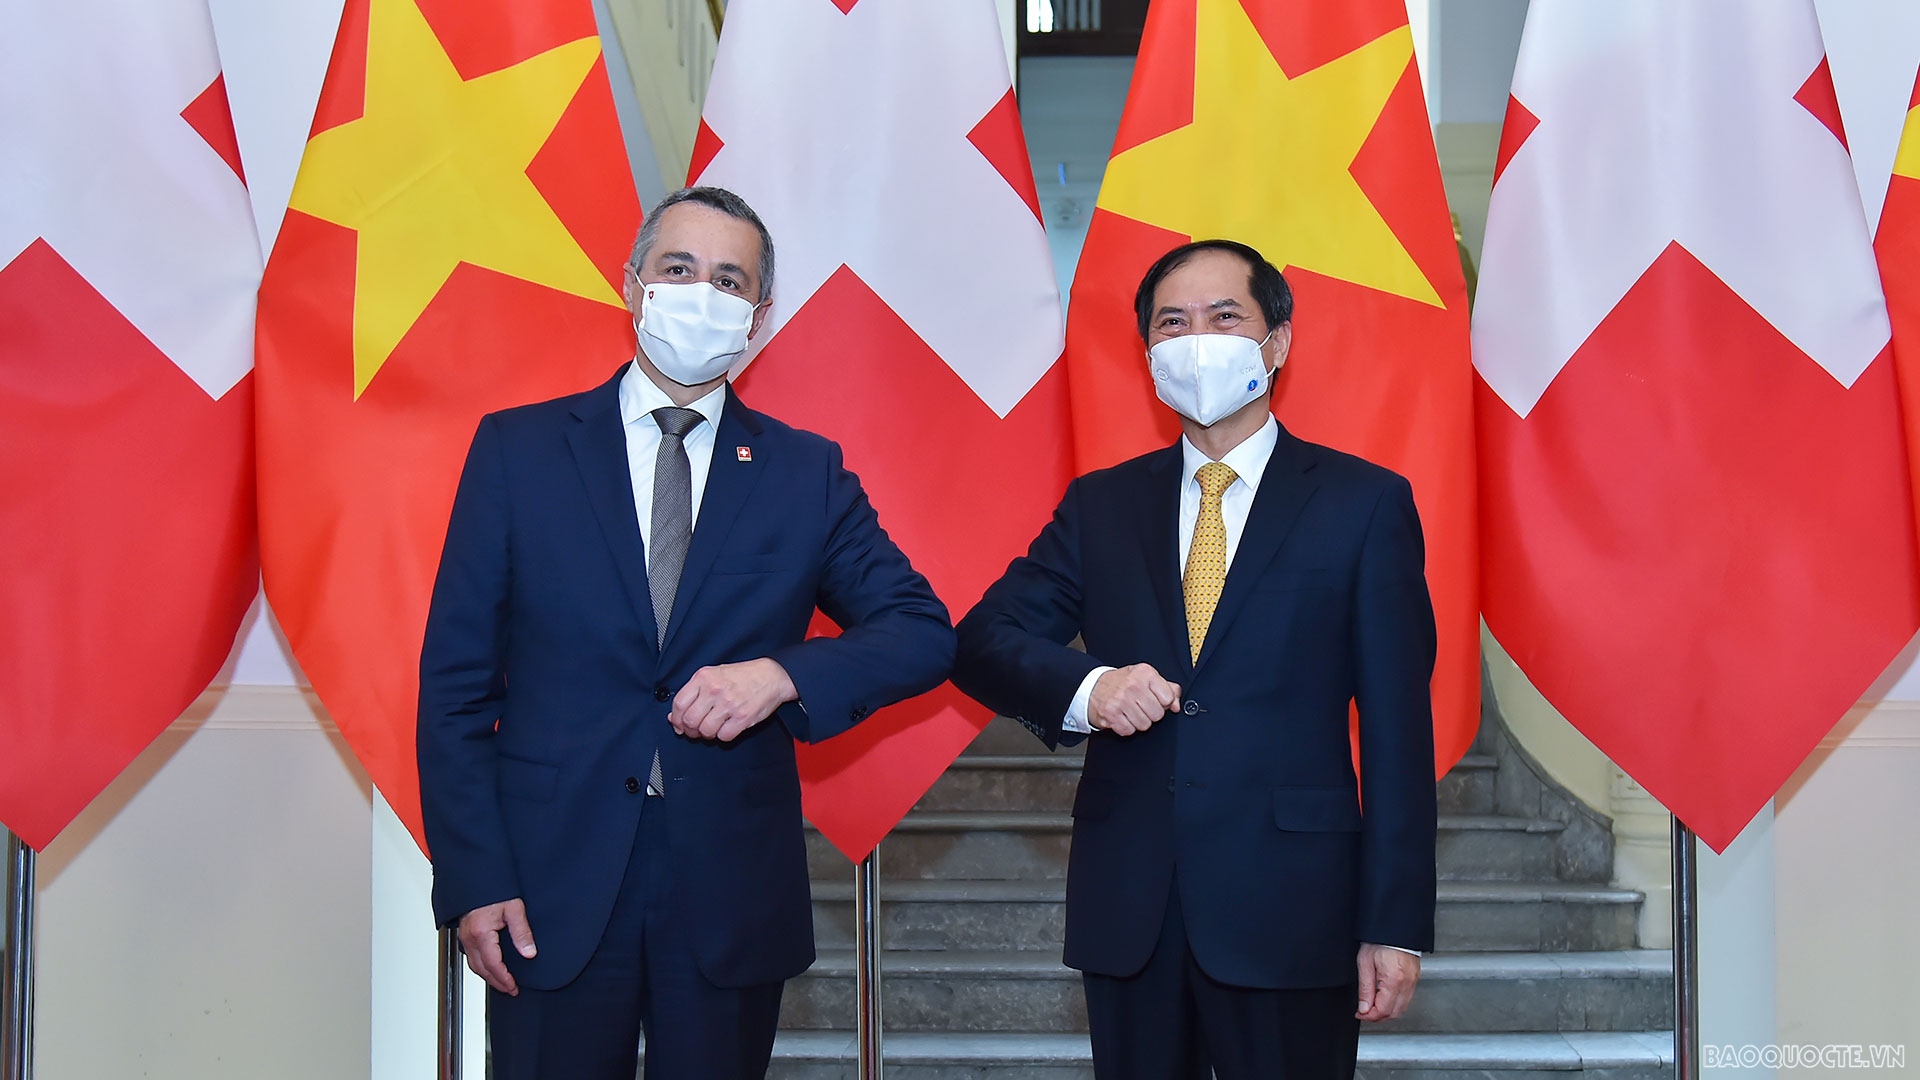 Viet Nam-Switzerland: A symbol of strong relationship for peace